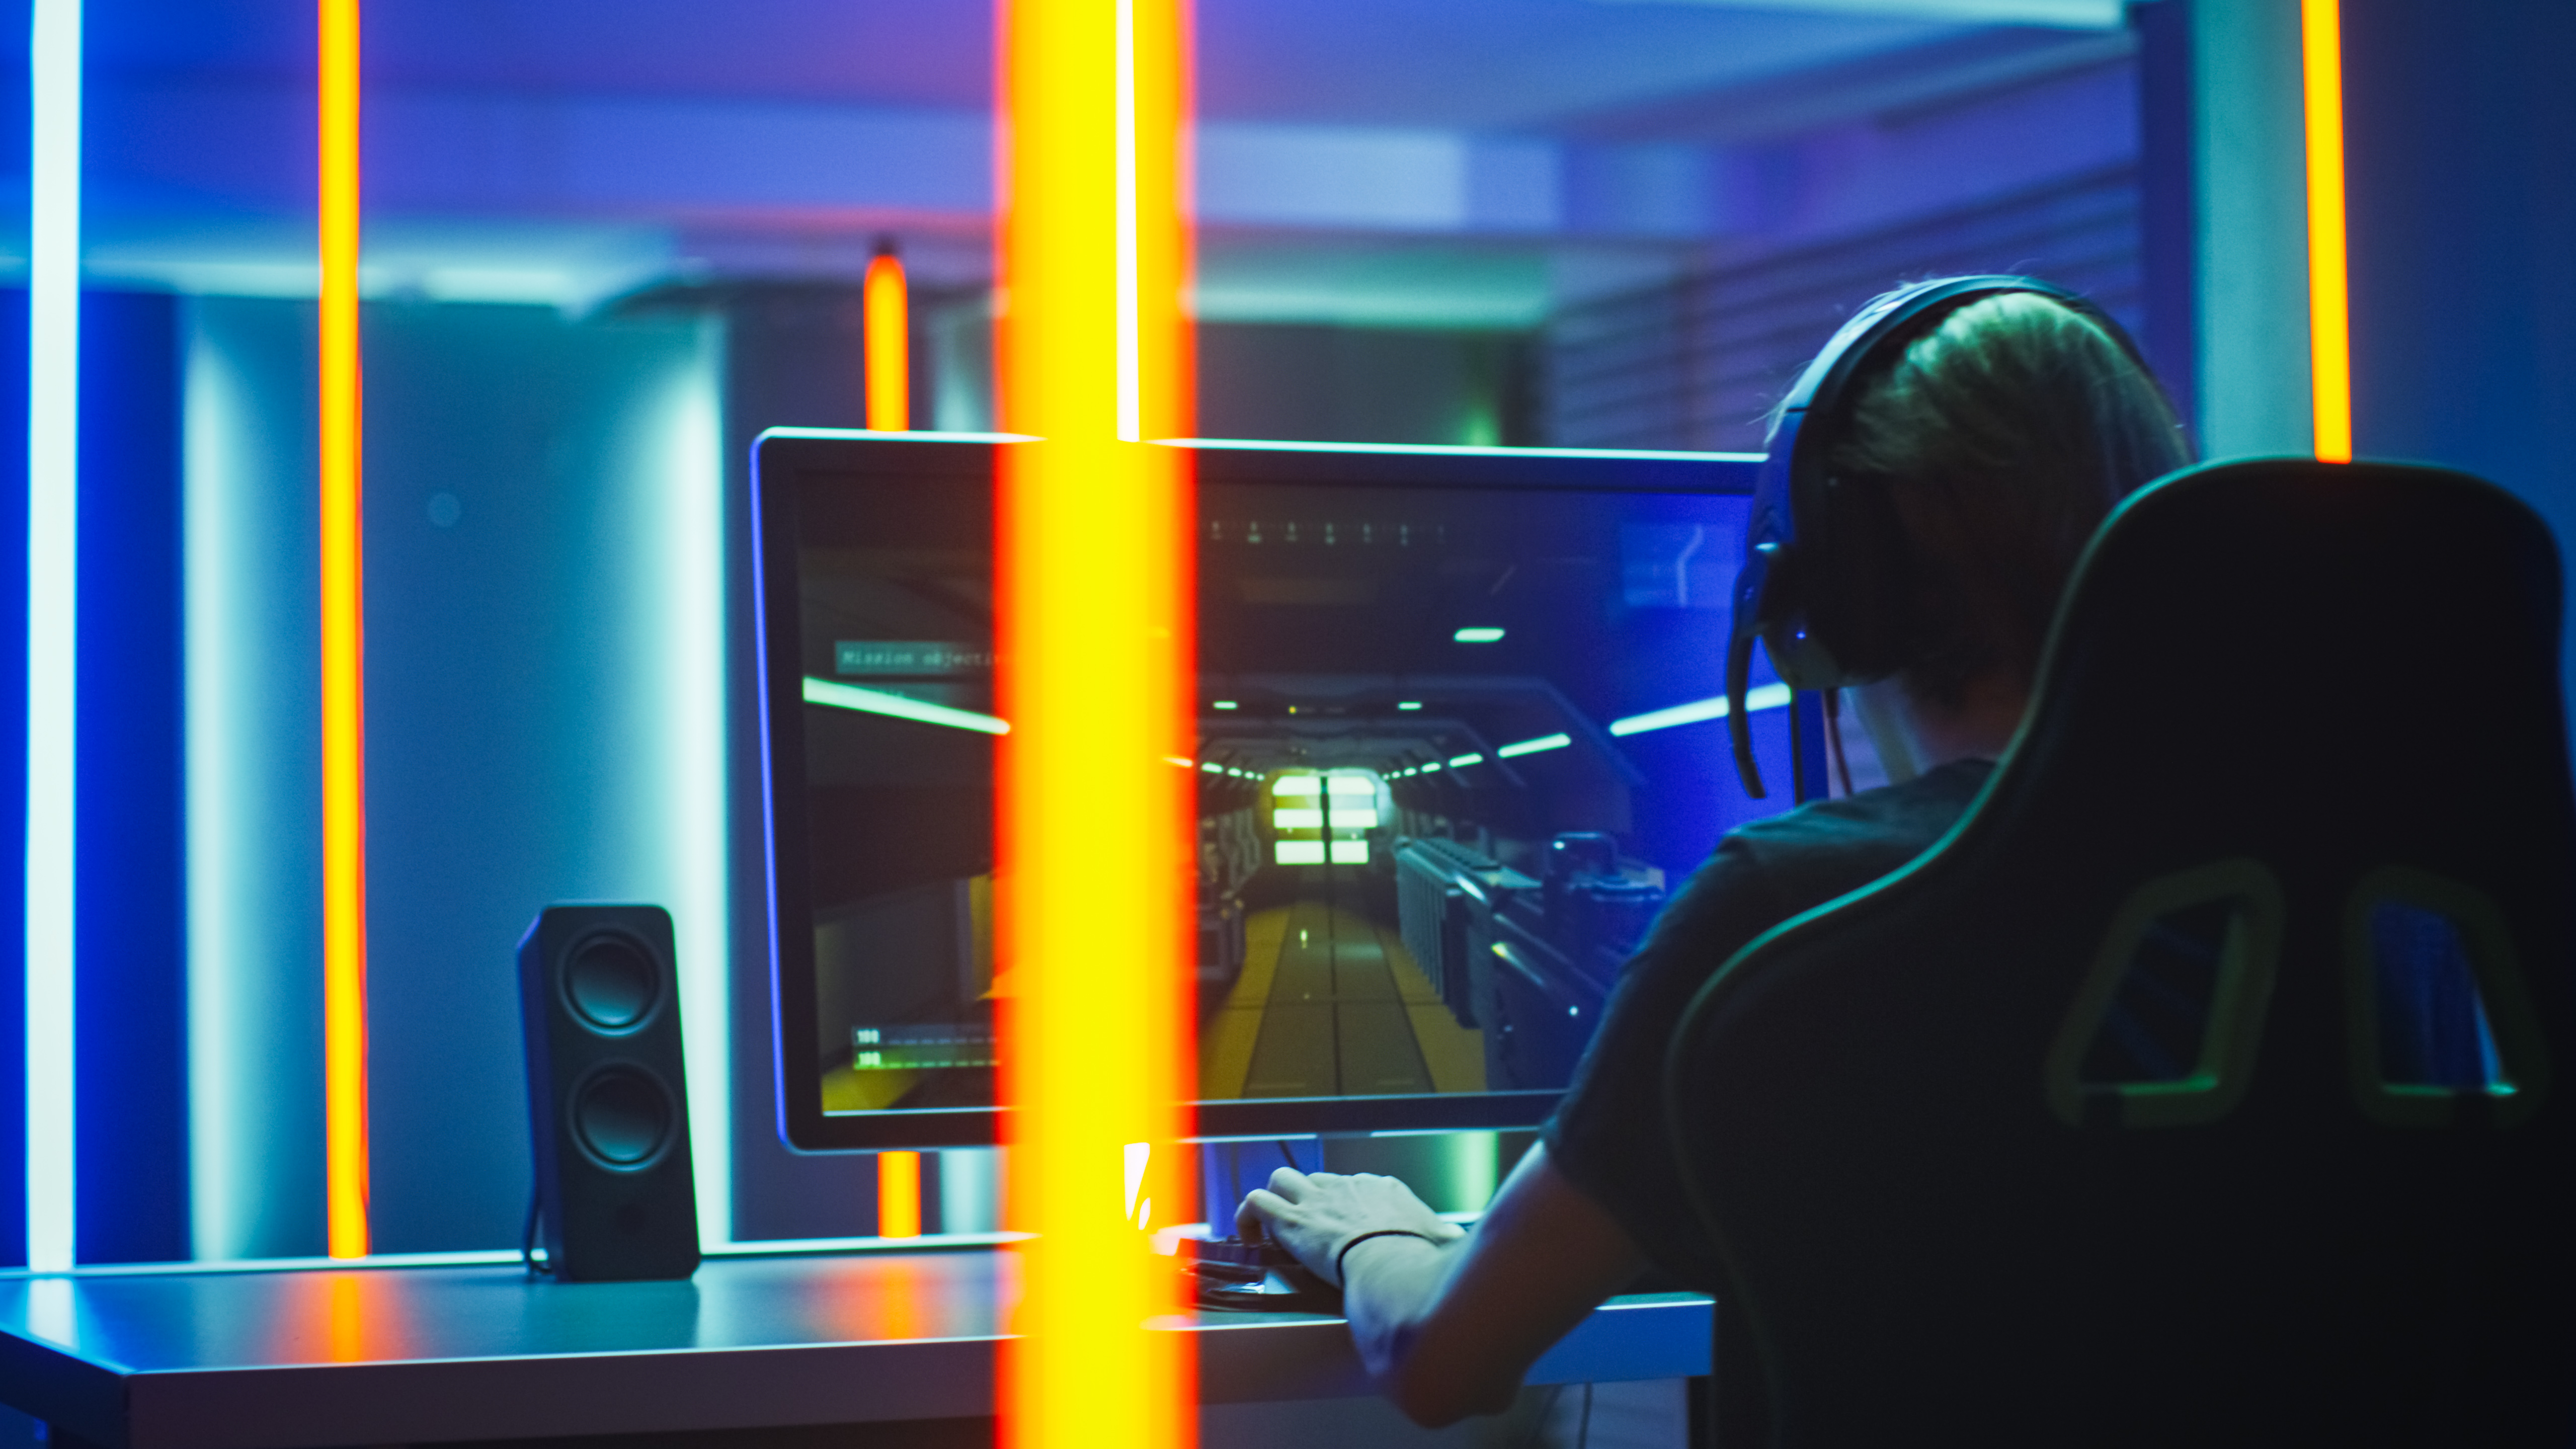 Pro Gamer Plays in the First Person Shooter on His Personal Computer. Talks with Teammates through Headphones. Neon Colored Room. Online eSport Tournament in Action.